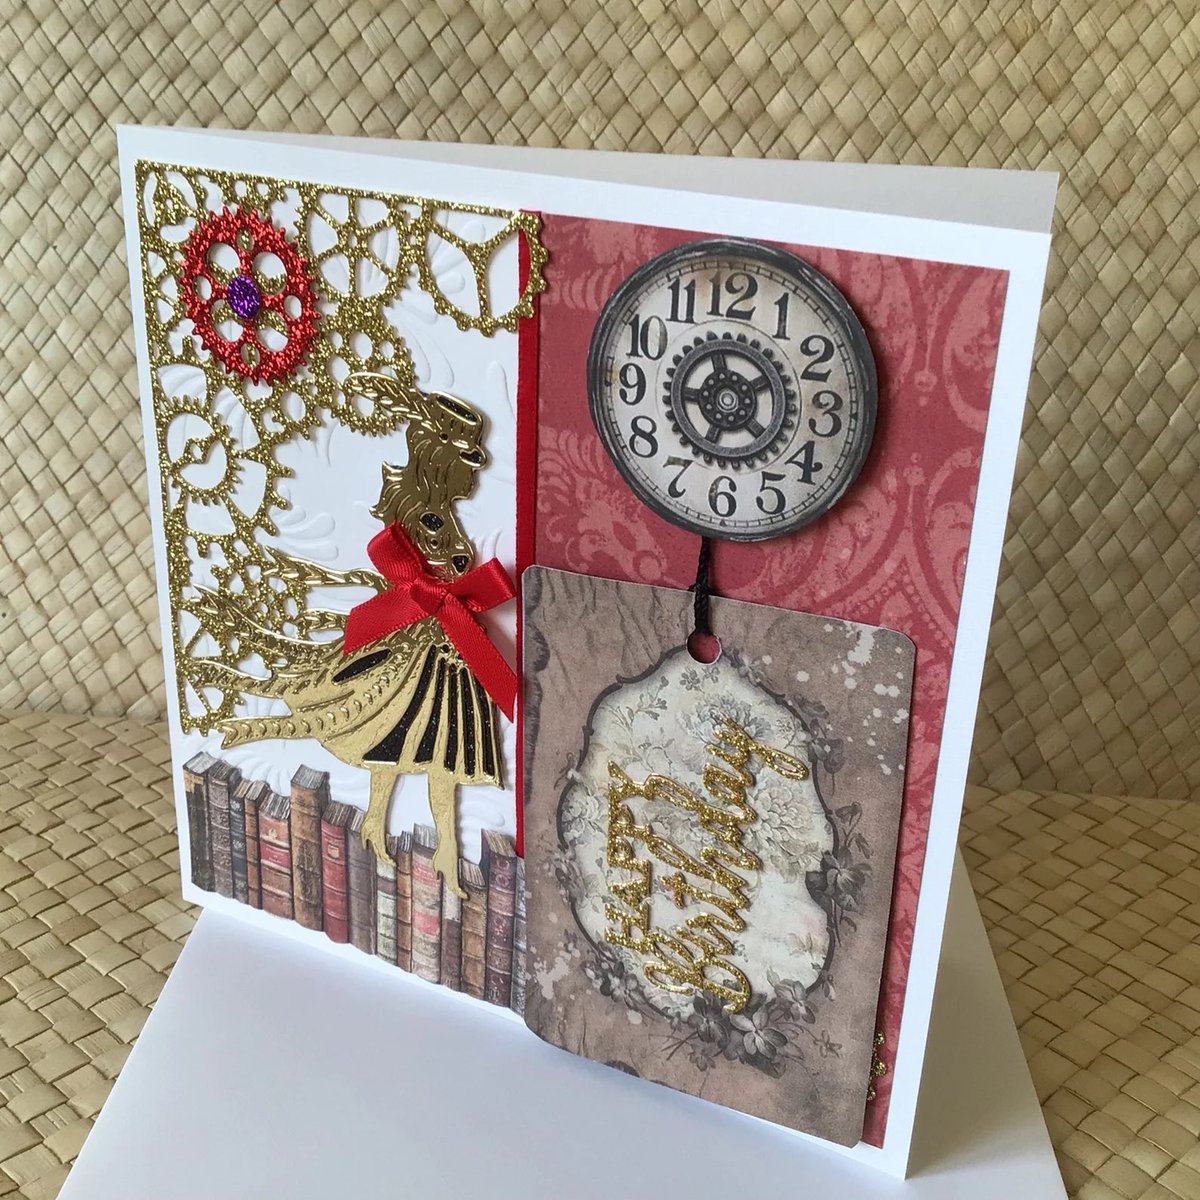 Reversible tag on this unique handmade card
Victorian Lady Steampunk Birthday Card, Vintage Library Design, The World is a Book, For Travel Lovers etsy.me/3WIzAad 

#UKGiftAM #shopindie #craftmakersuk #sundayvibes